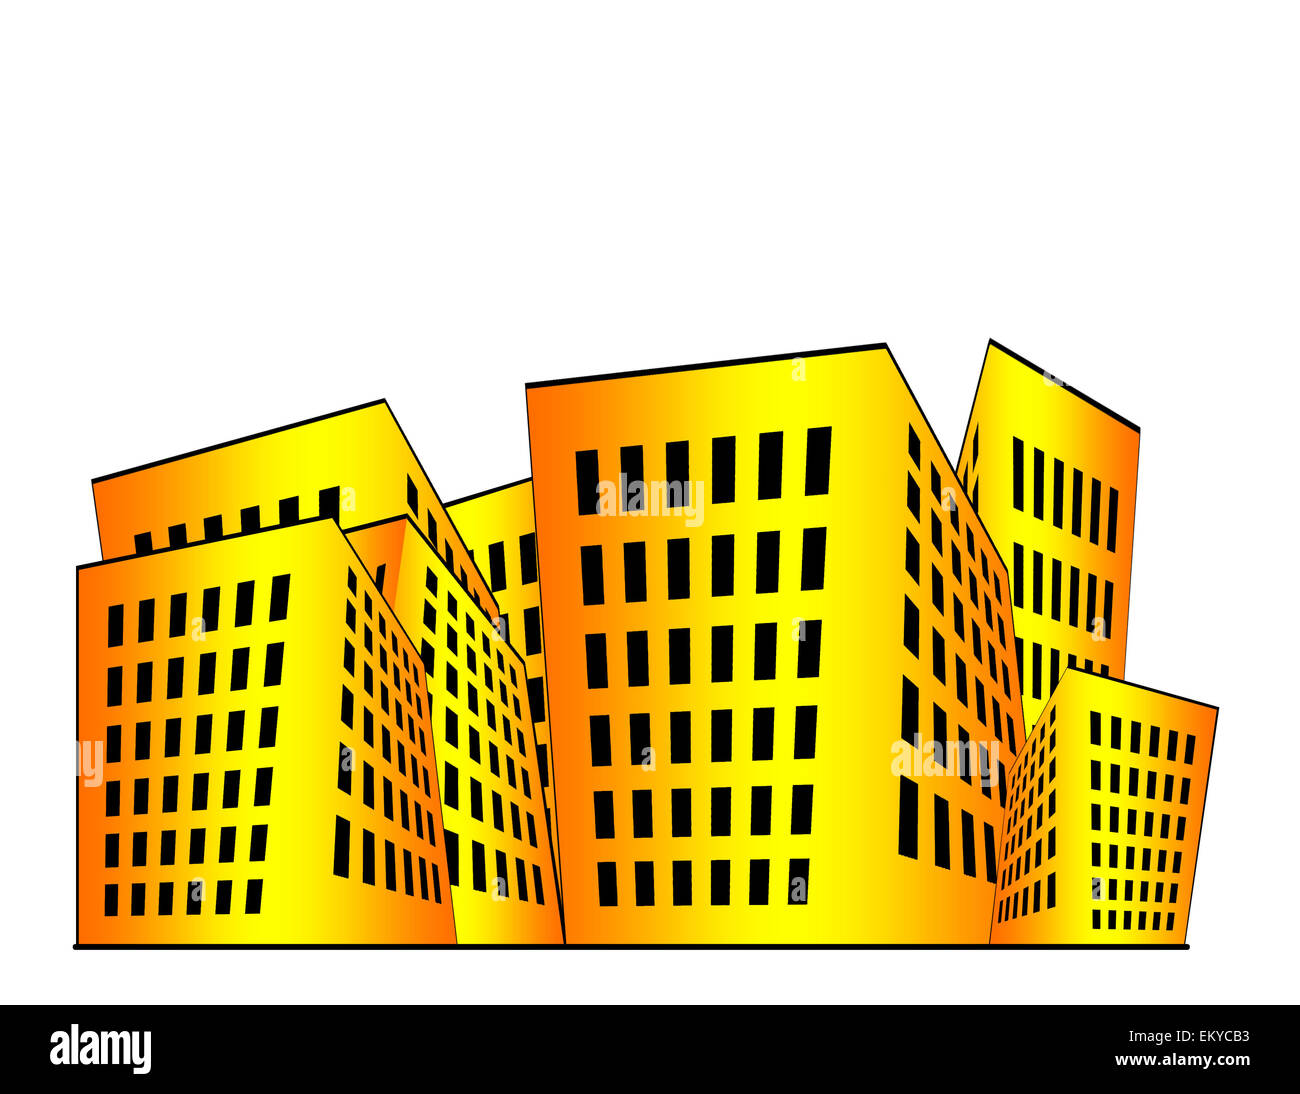 Building illustration in orange and yellow gradient with white space above. Stock Photo